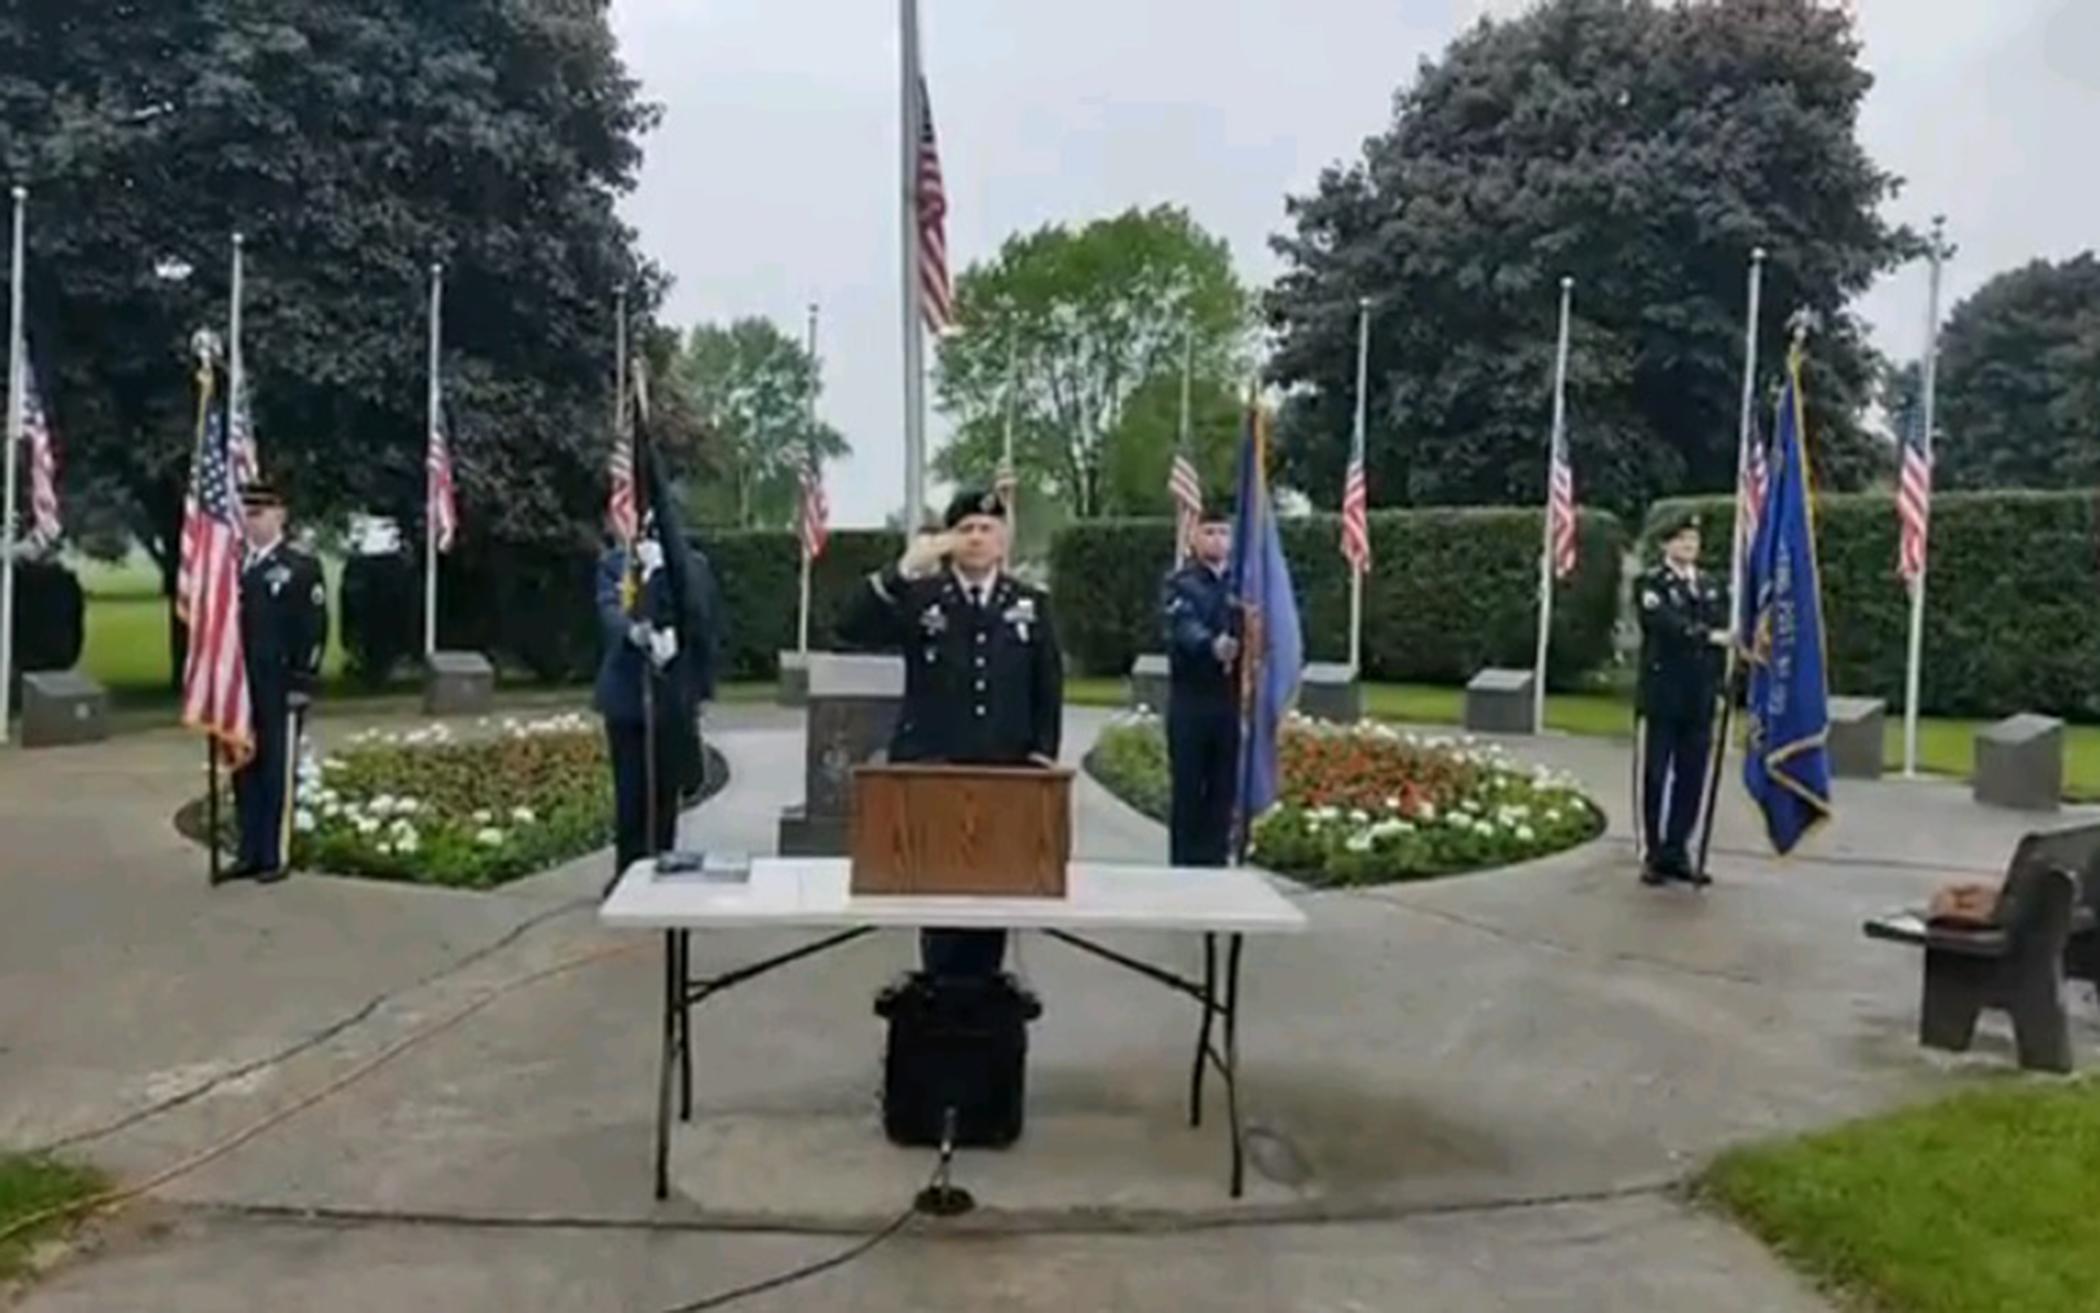 From the Memory Gardens in Sioux Center, Iowa, chaplains and servicemen marked Memorial Day with a service broadcast on radio and Facebook live.